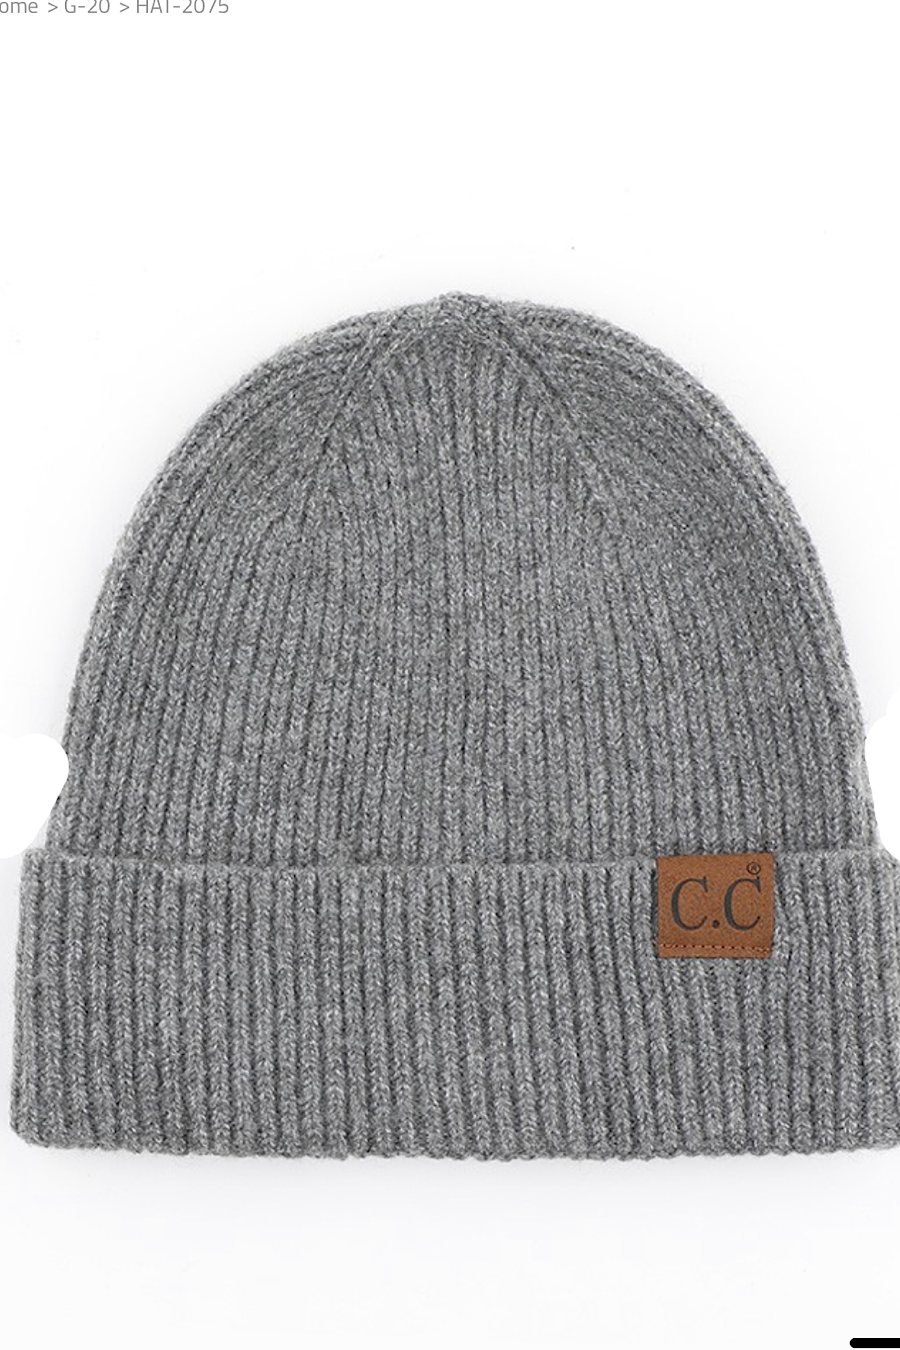 CC Recycled Yarn Beanie Hat in Several Colors!